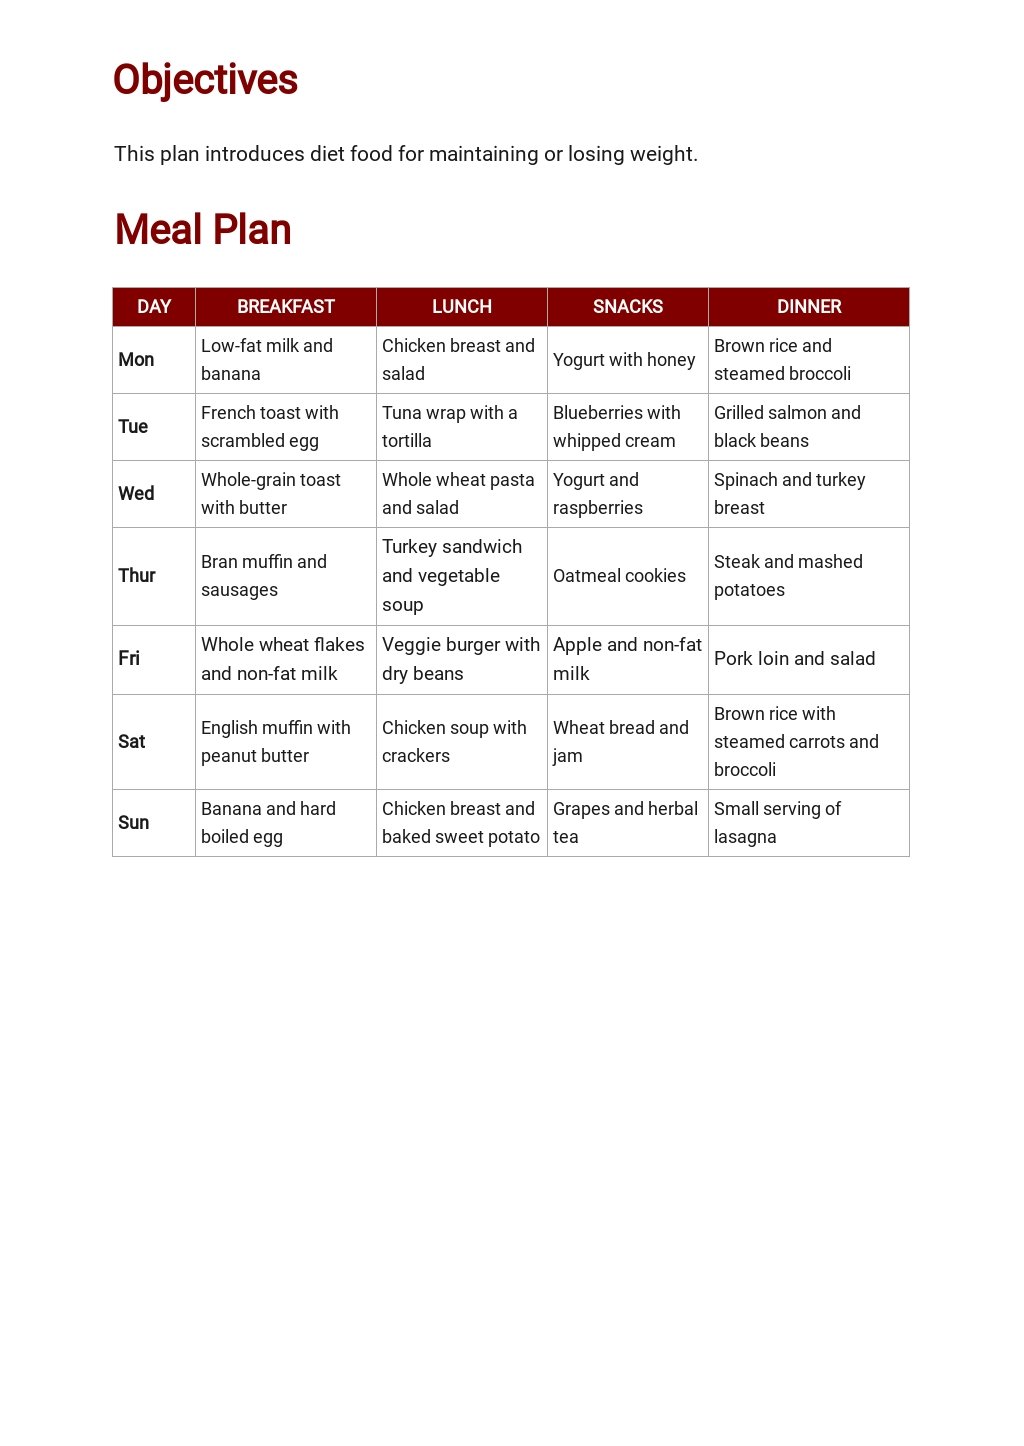 Diet Meal Plan Template - Google Docs, Word, Apple Pages, PDF ...